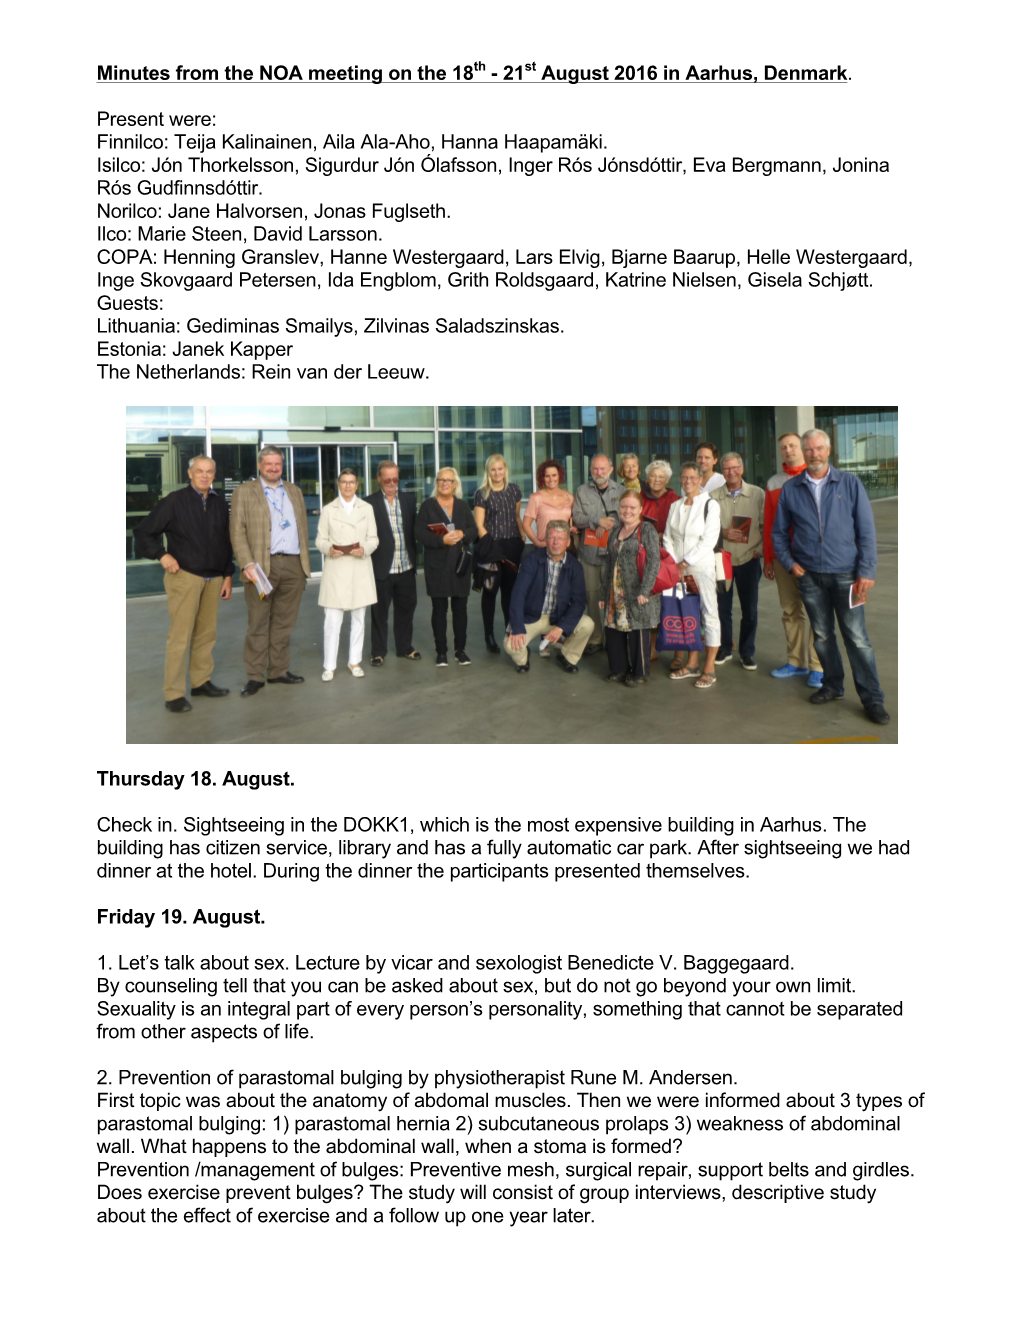 Minutes from the NOA Meeting on the 18Th - 21St August 2016 in Aarhus, Denmark